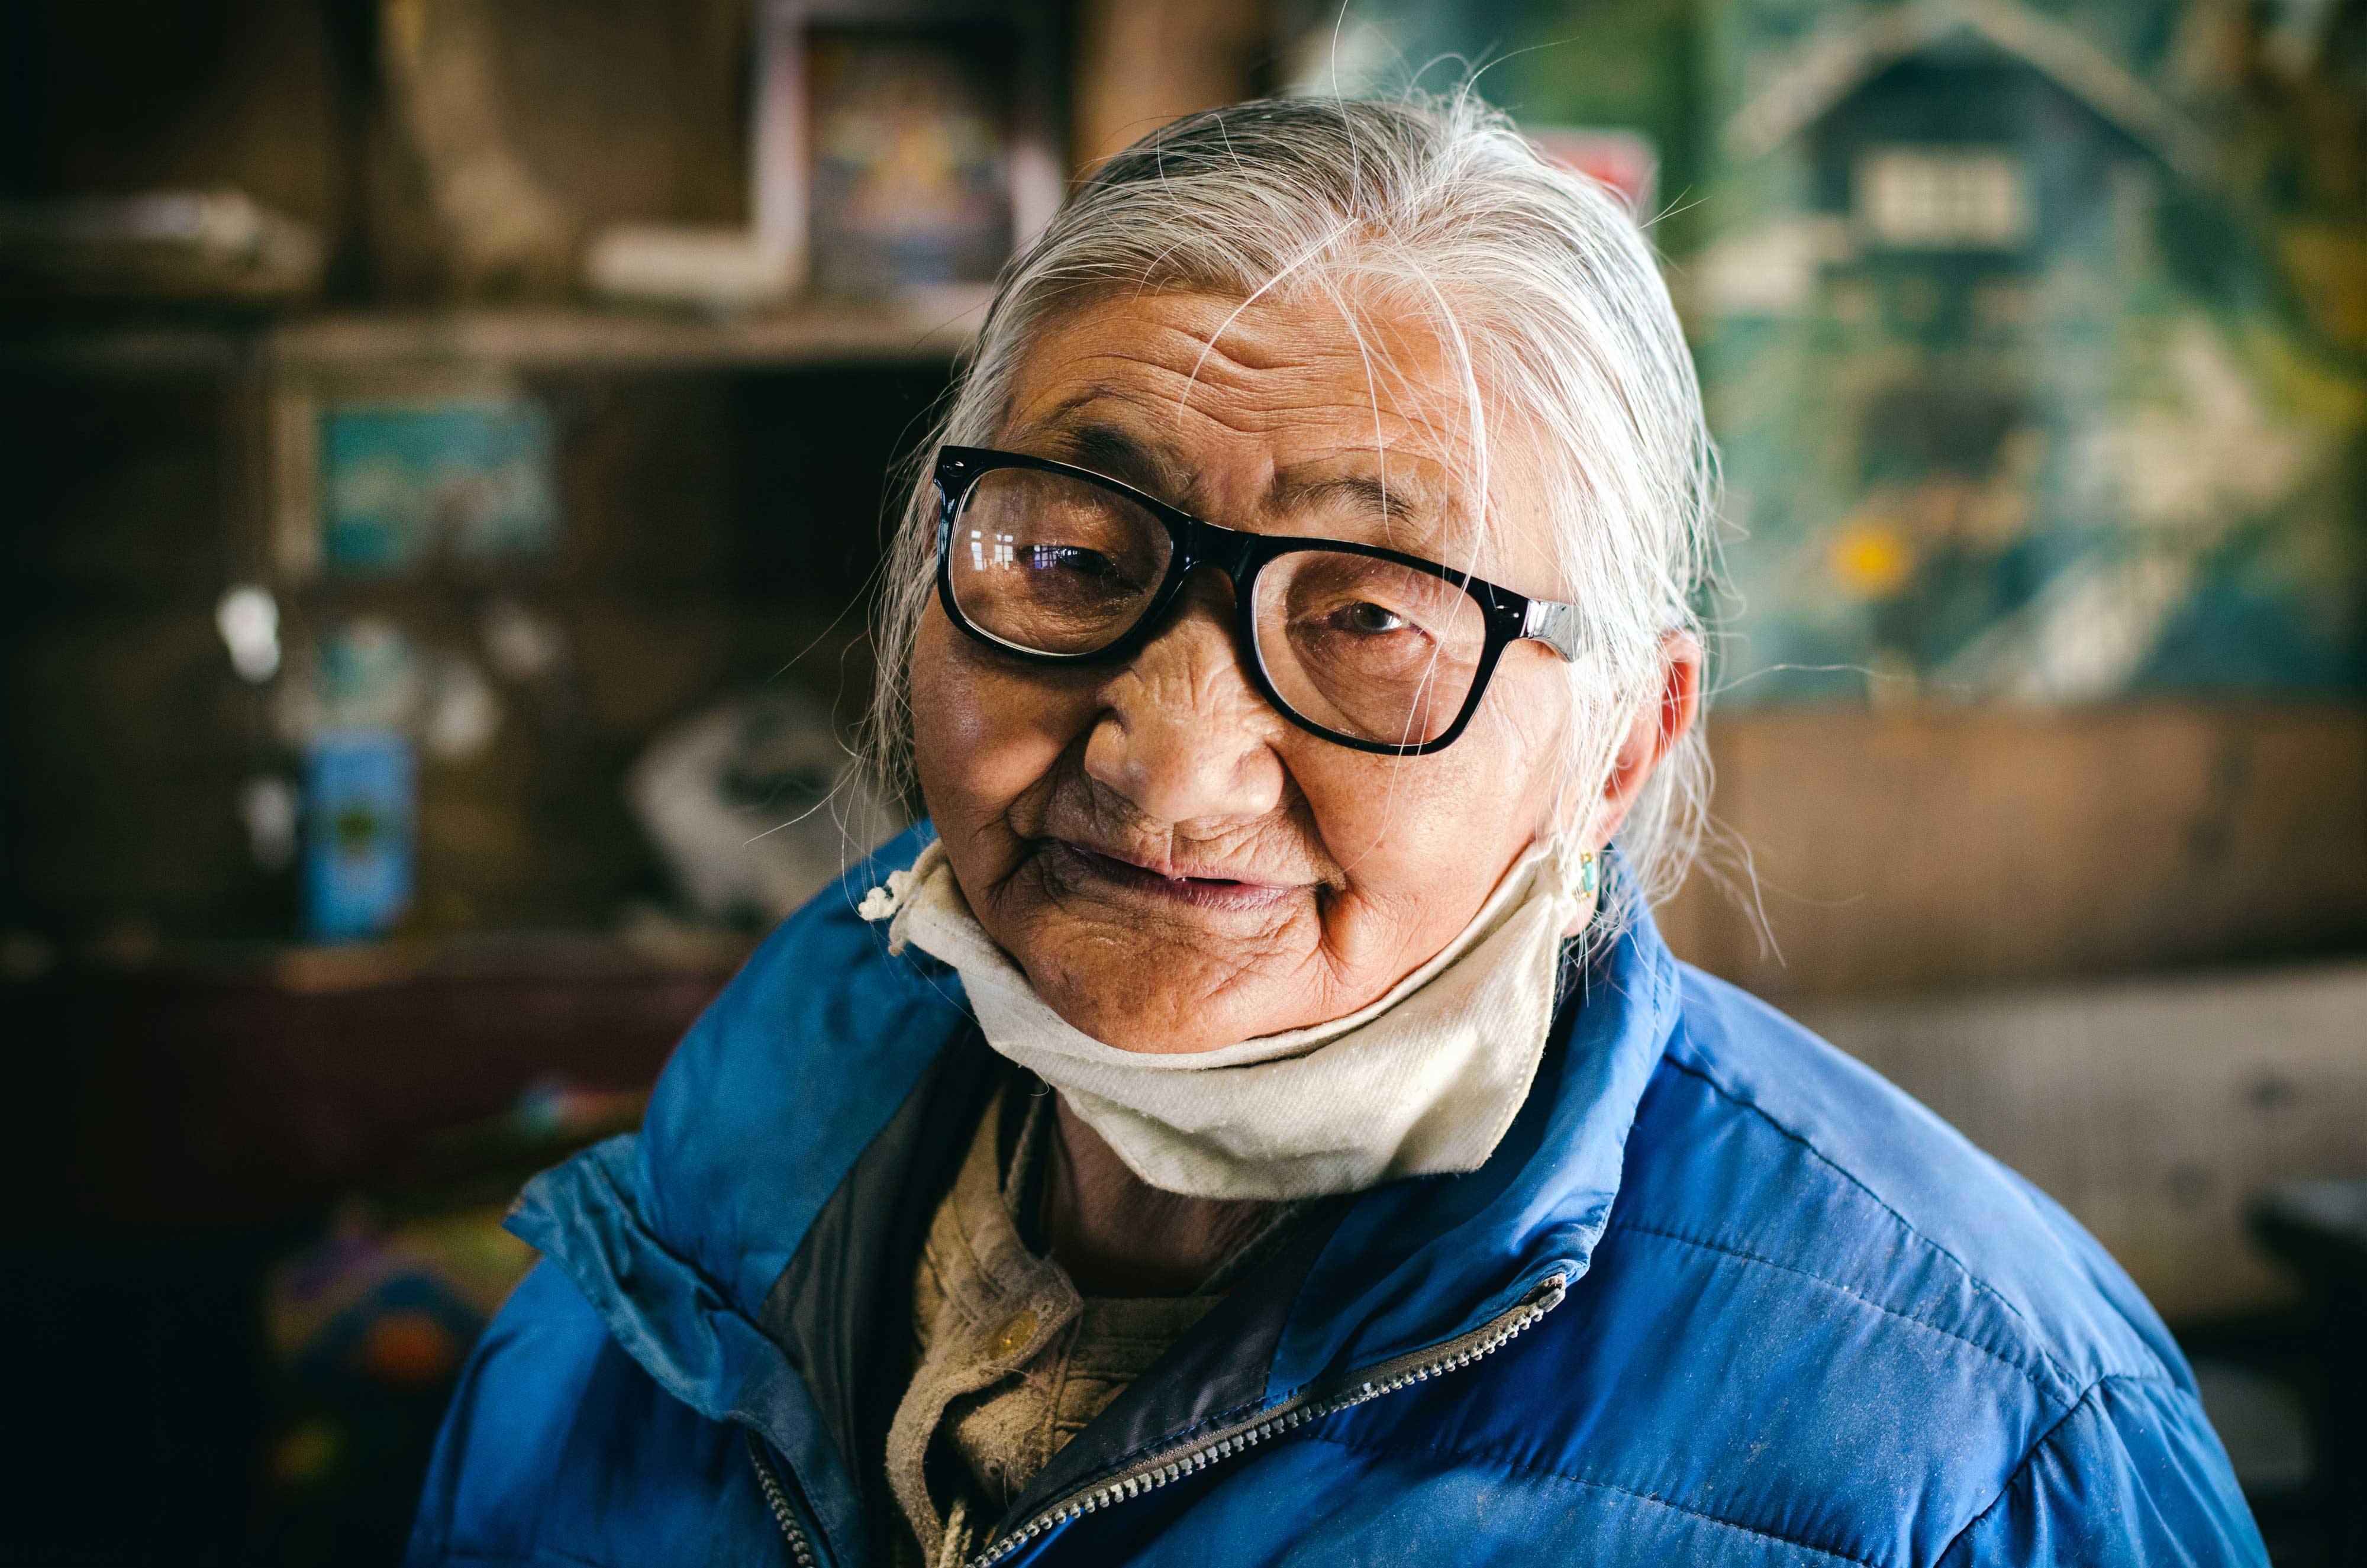 Old Lady with spectacles